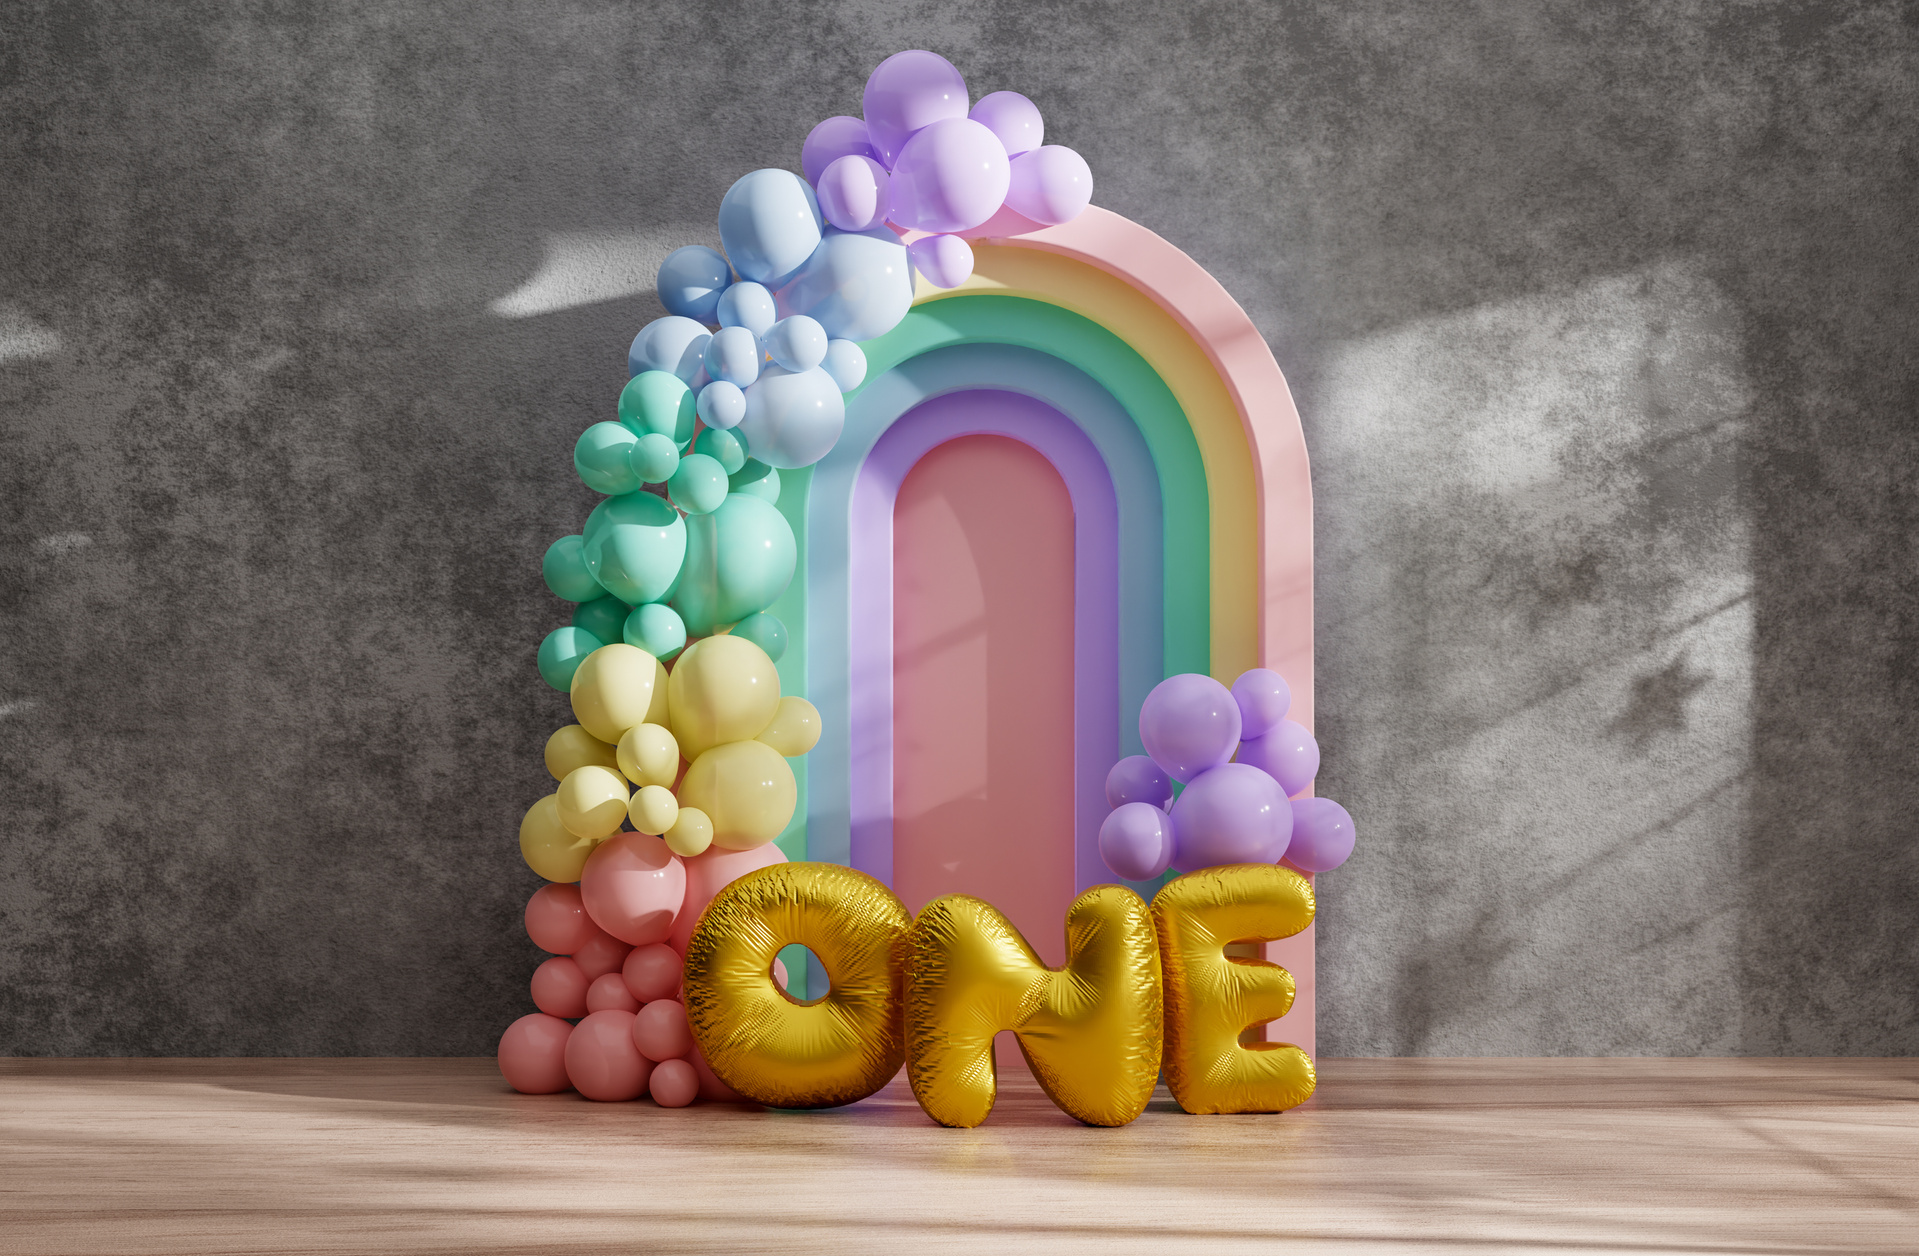 Celebration room No.1 with rainbow balloons, First birthday decorations, 3D Rendering.